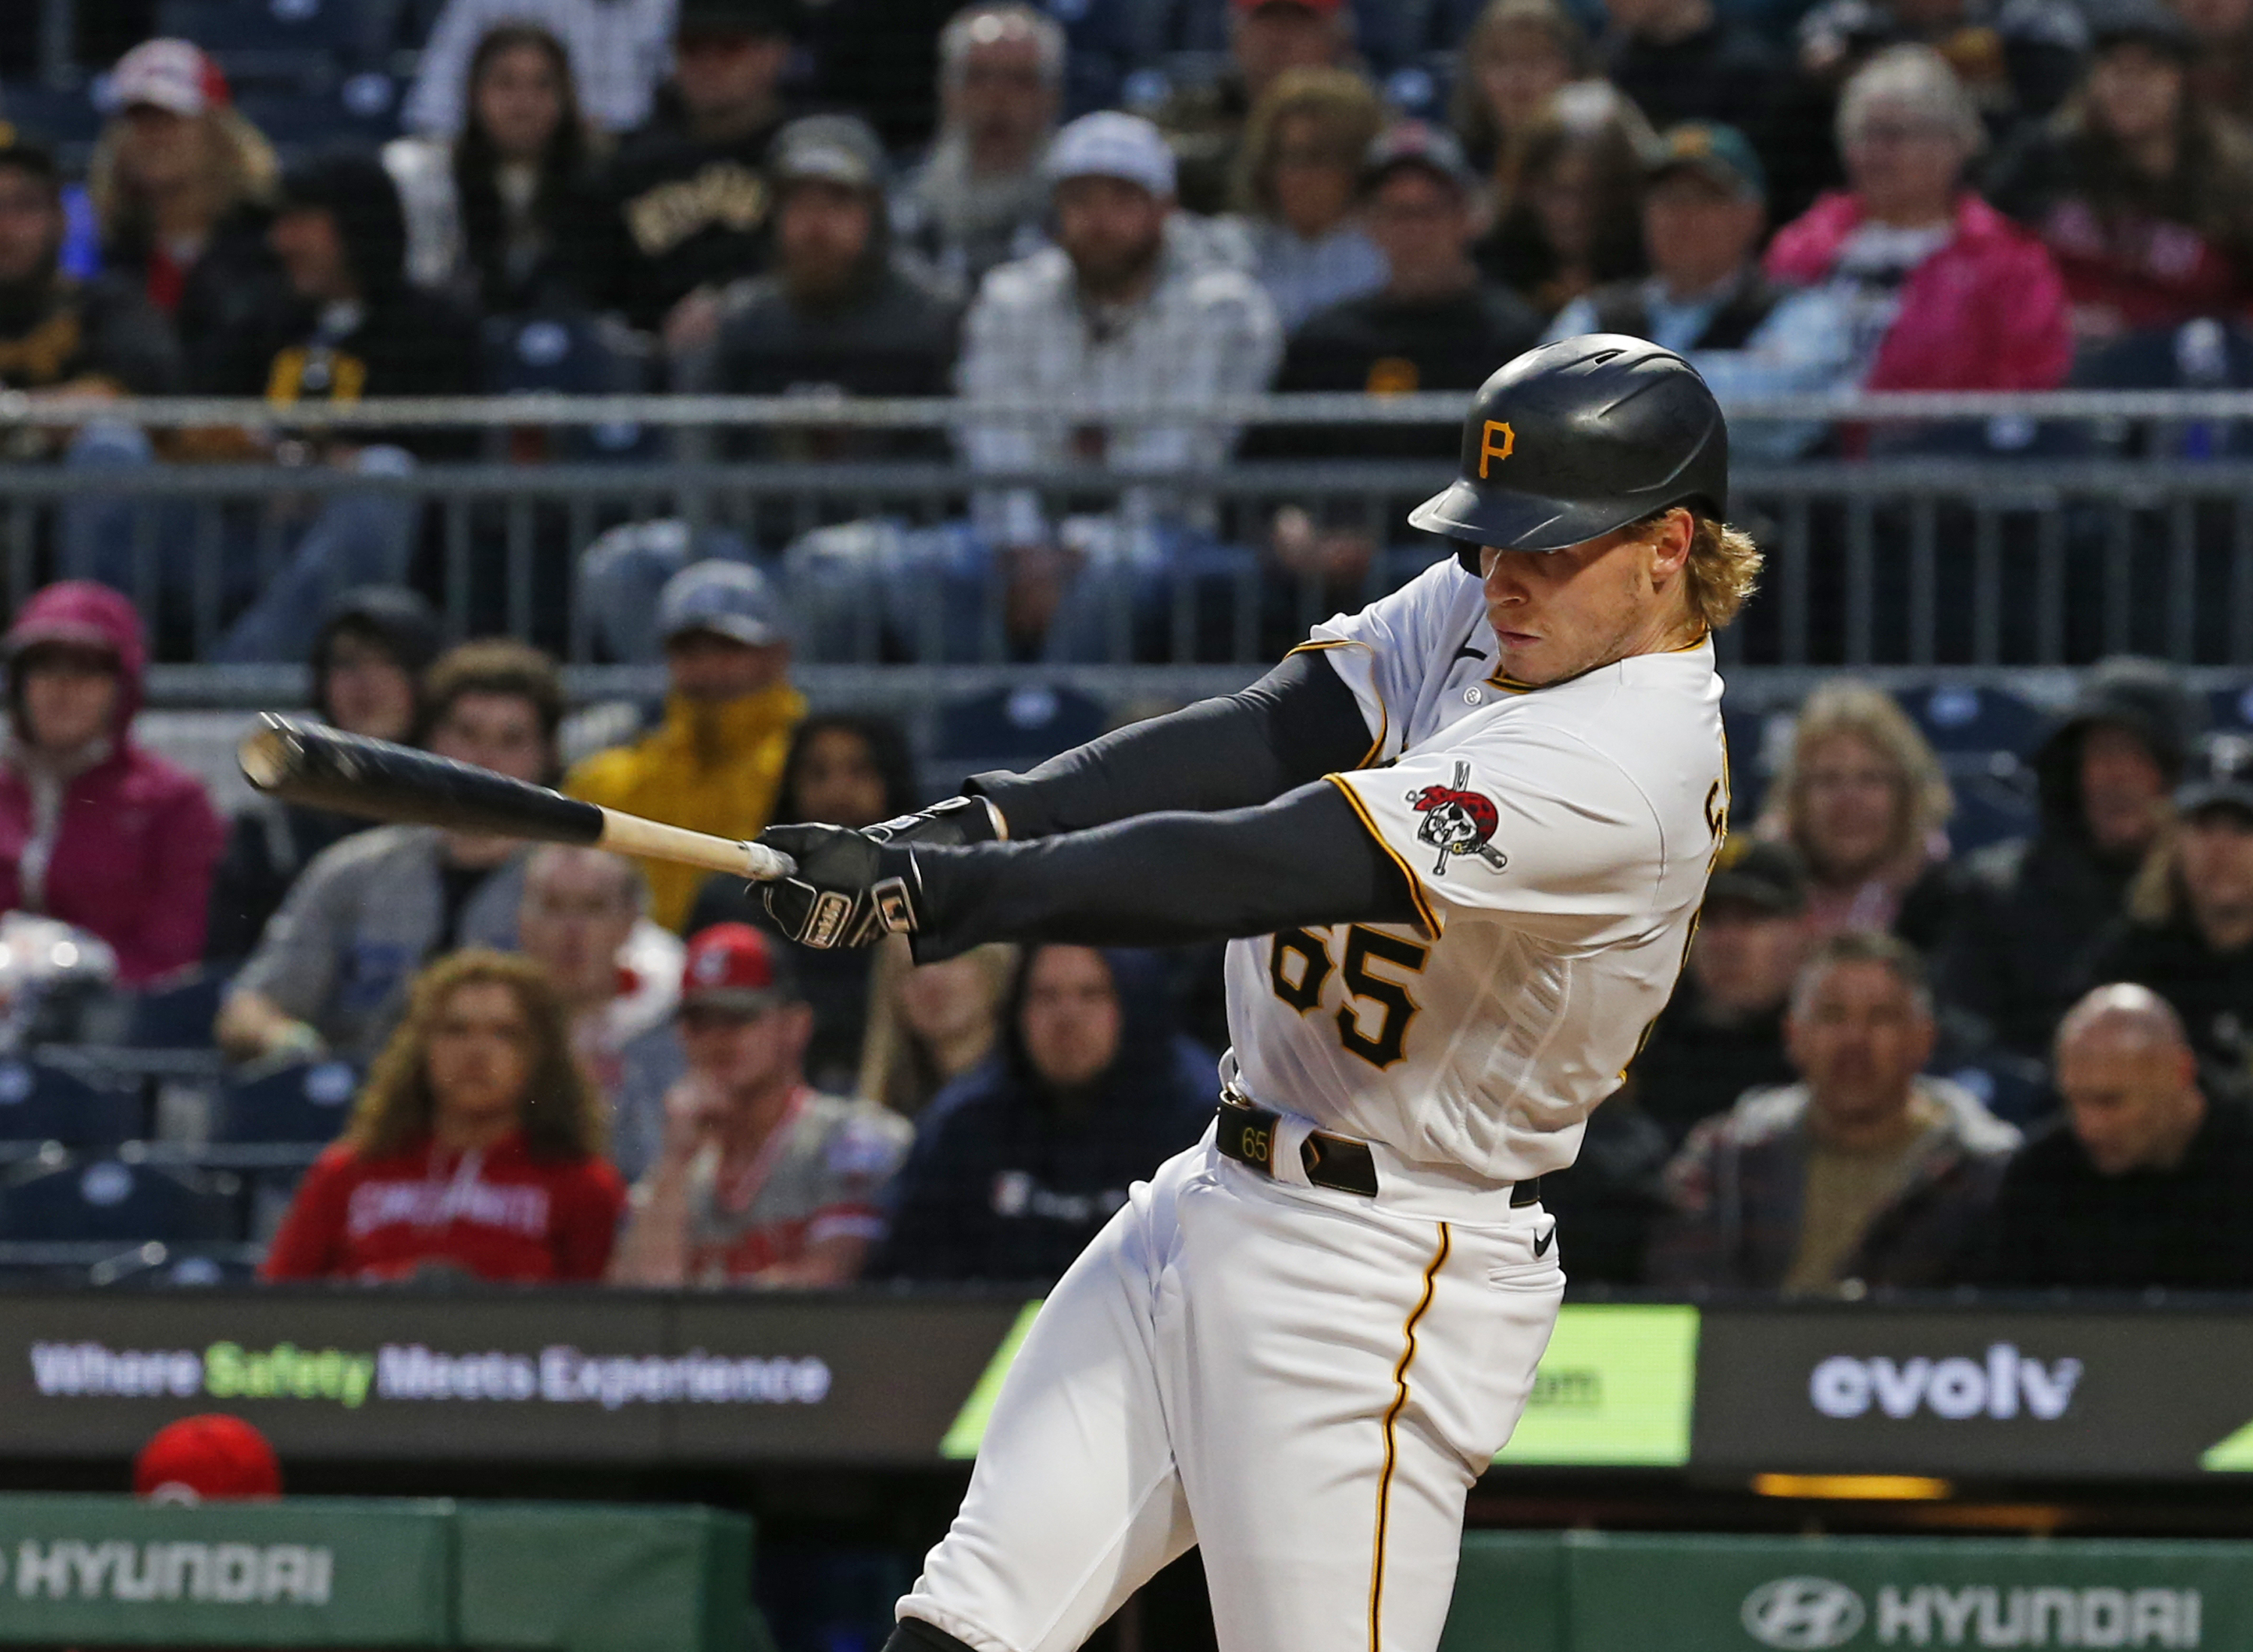 Jack Suwinski of the Pittsburgh Pirates hits during the fourth inning in the game against the Cincinnati Reds at PNC Park in Pittsburgh, Pennsylvania, April 22, 2023. /CFP 